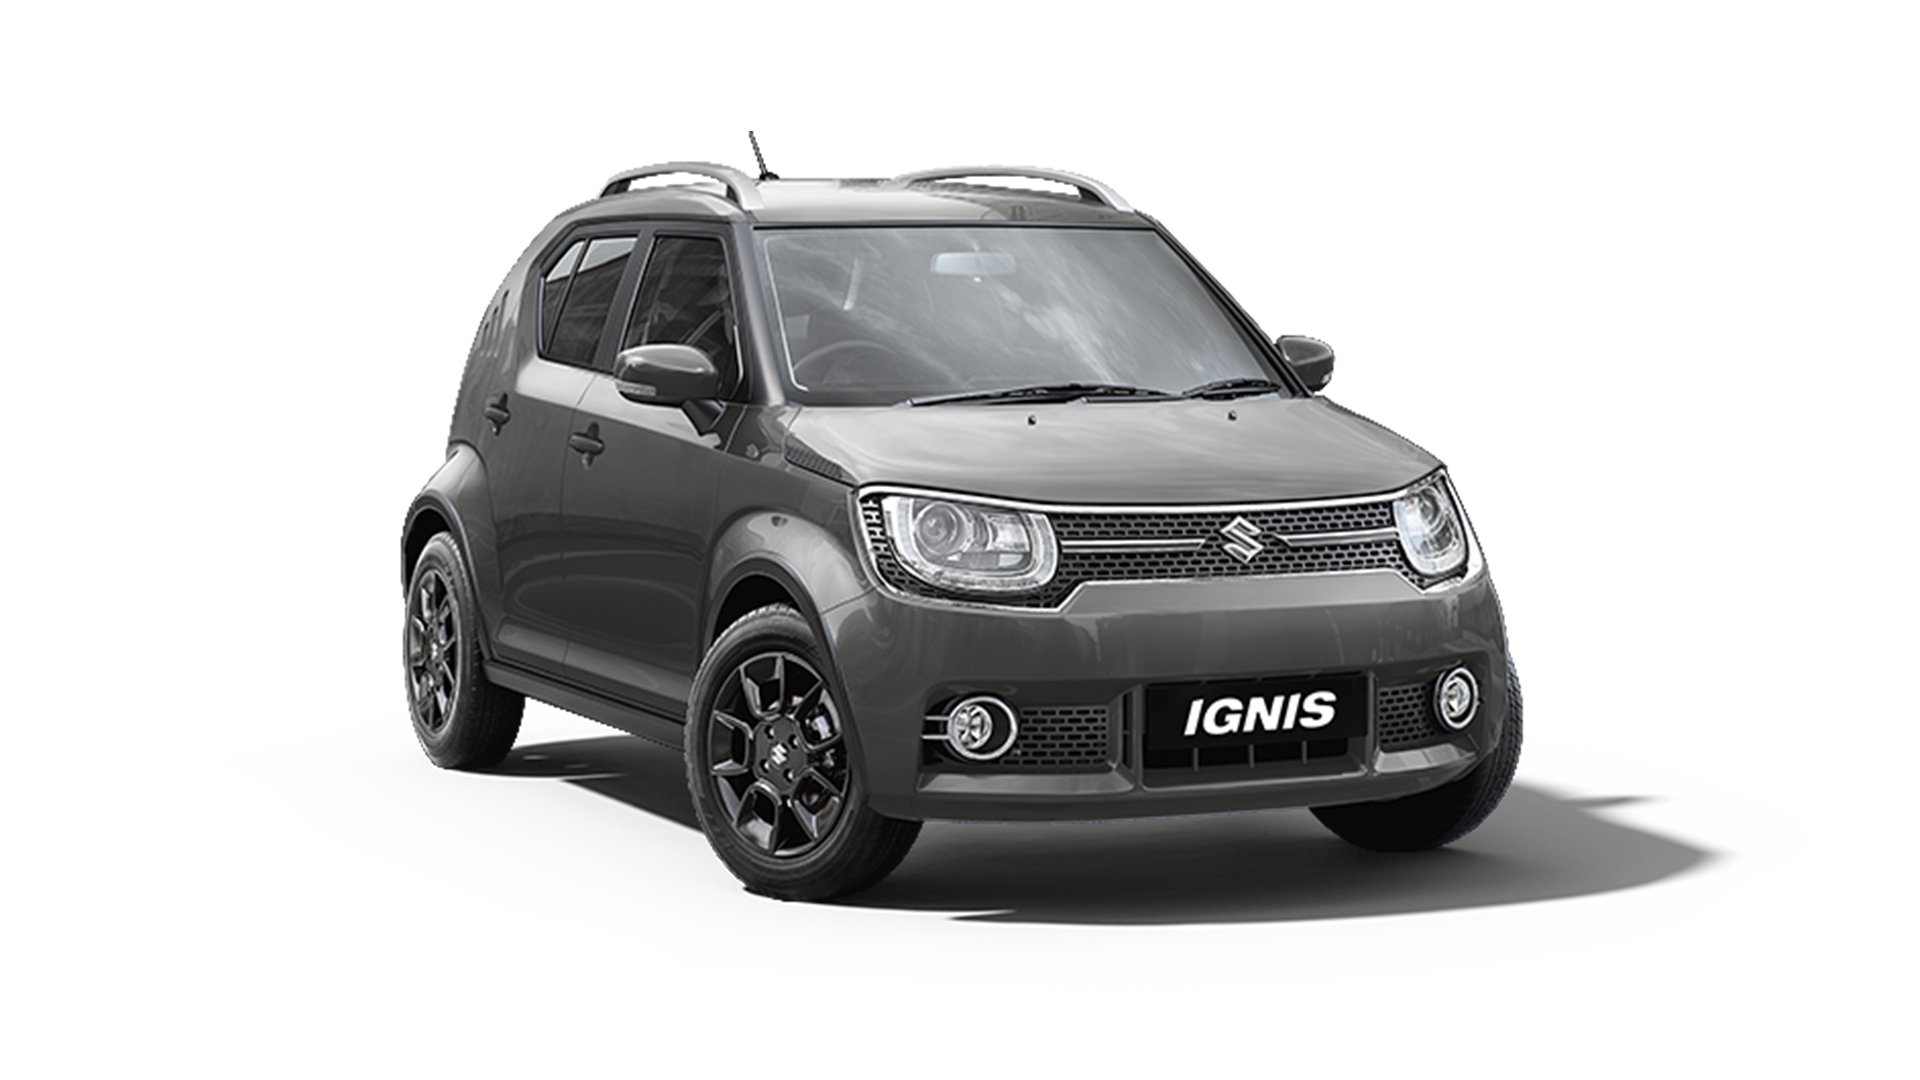 Ignis [2019 2020] Image & Exterior Photo Gallery [Images]